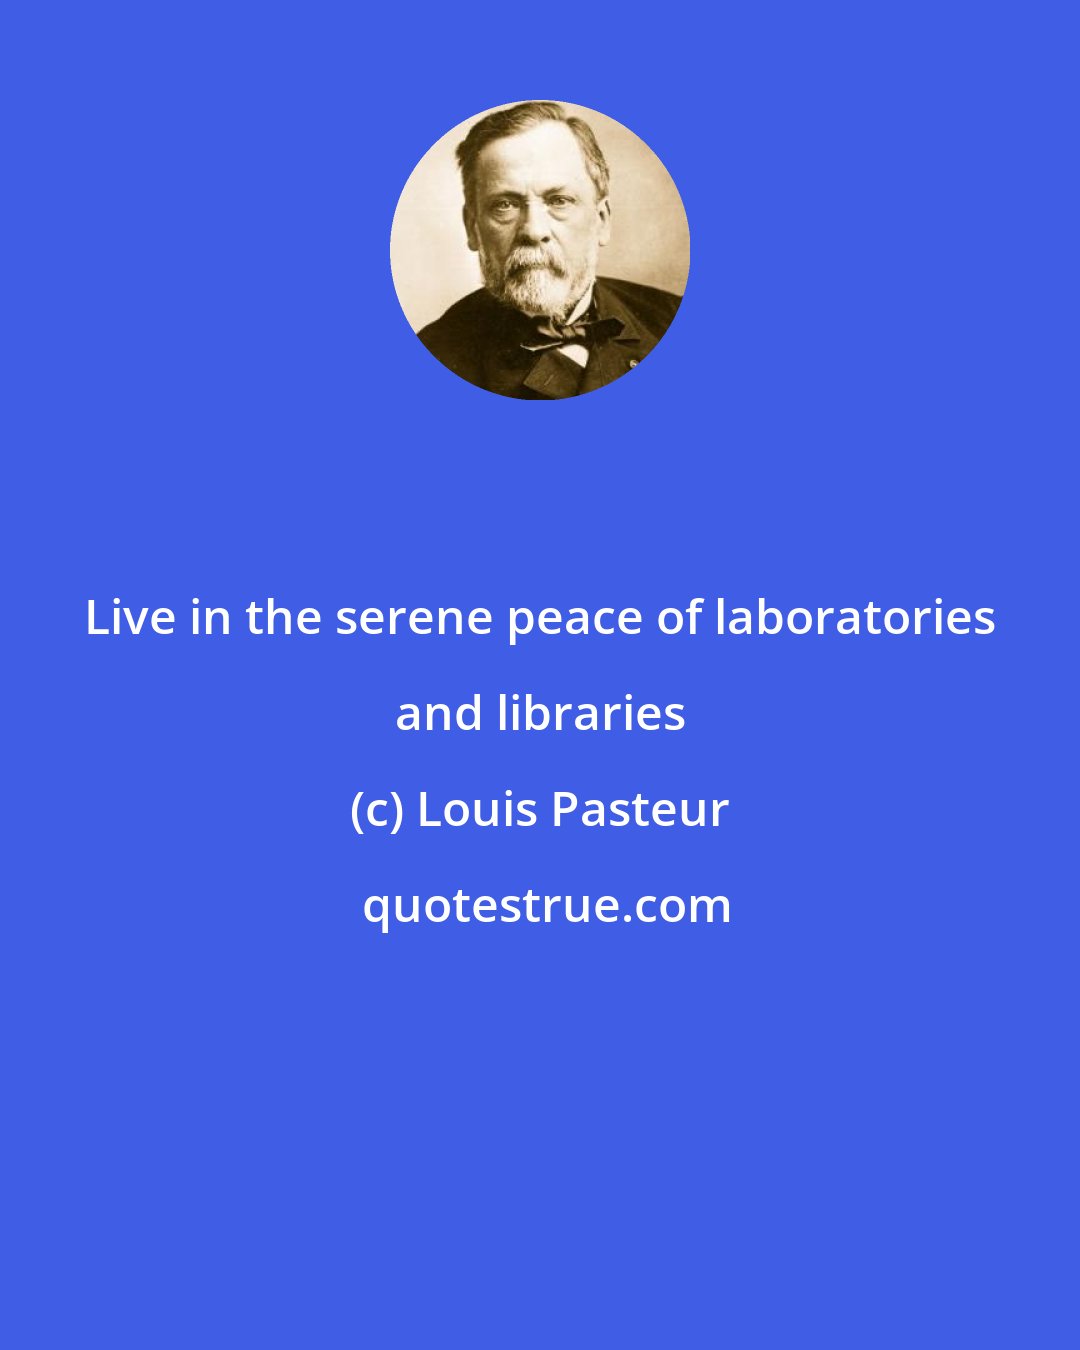 Louis Pasteur: Live in the serene peace of laboratories and libraries